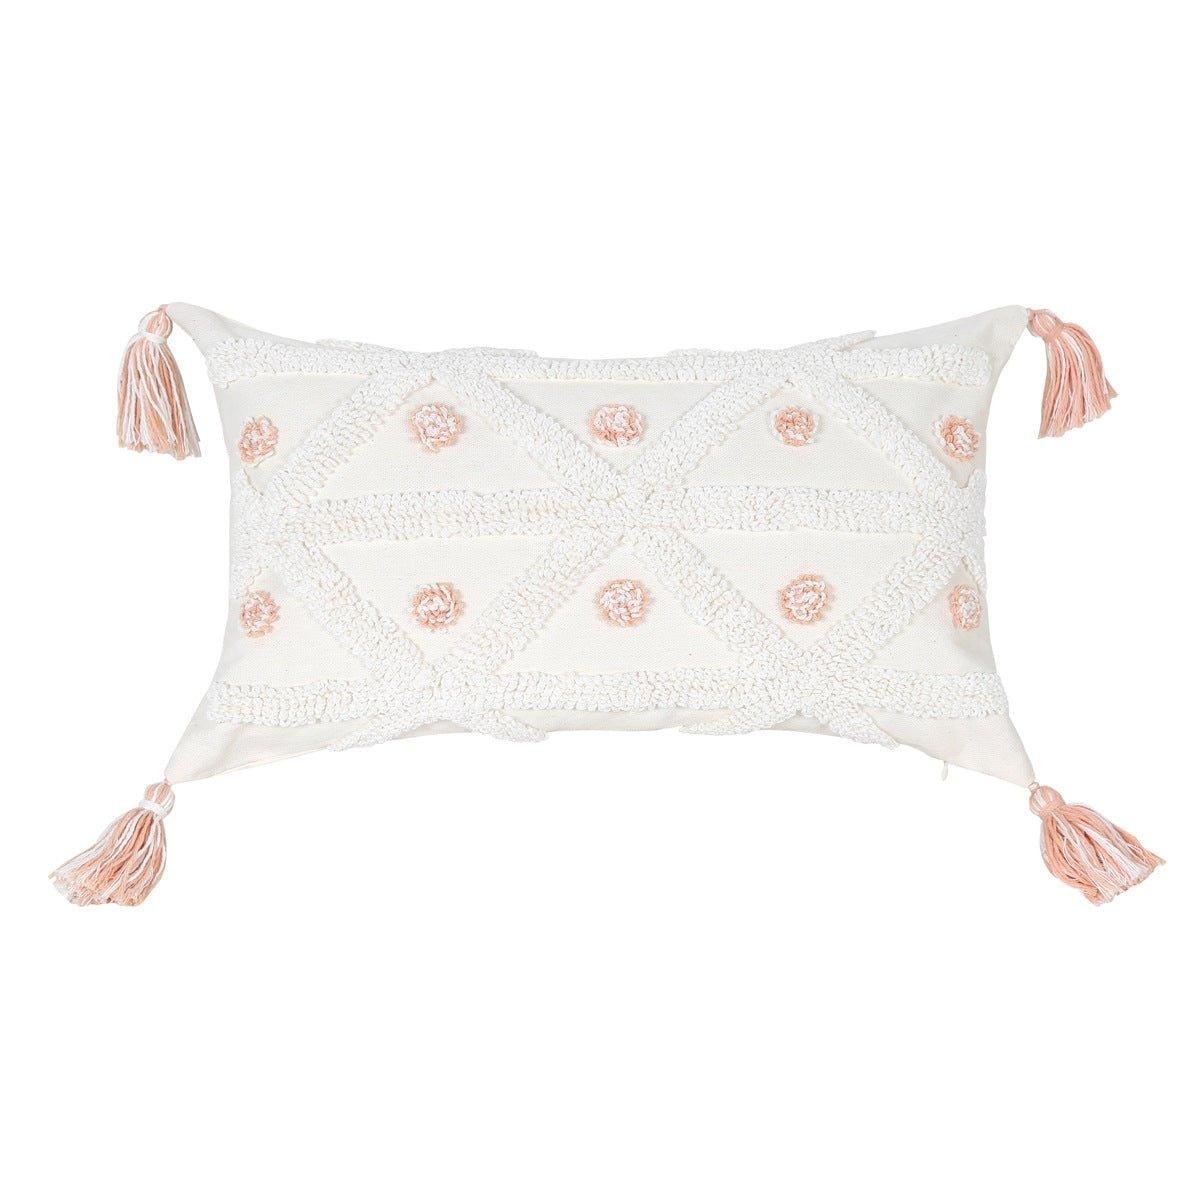 Embroidered Tufted Embroidered Pillowcase - Lilpins Essentials